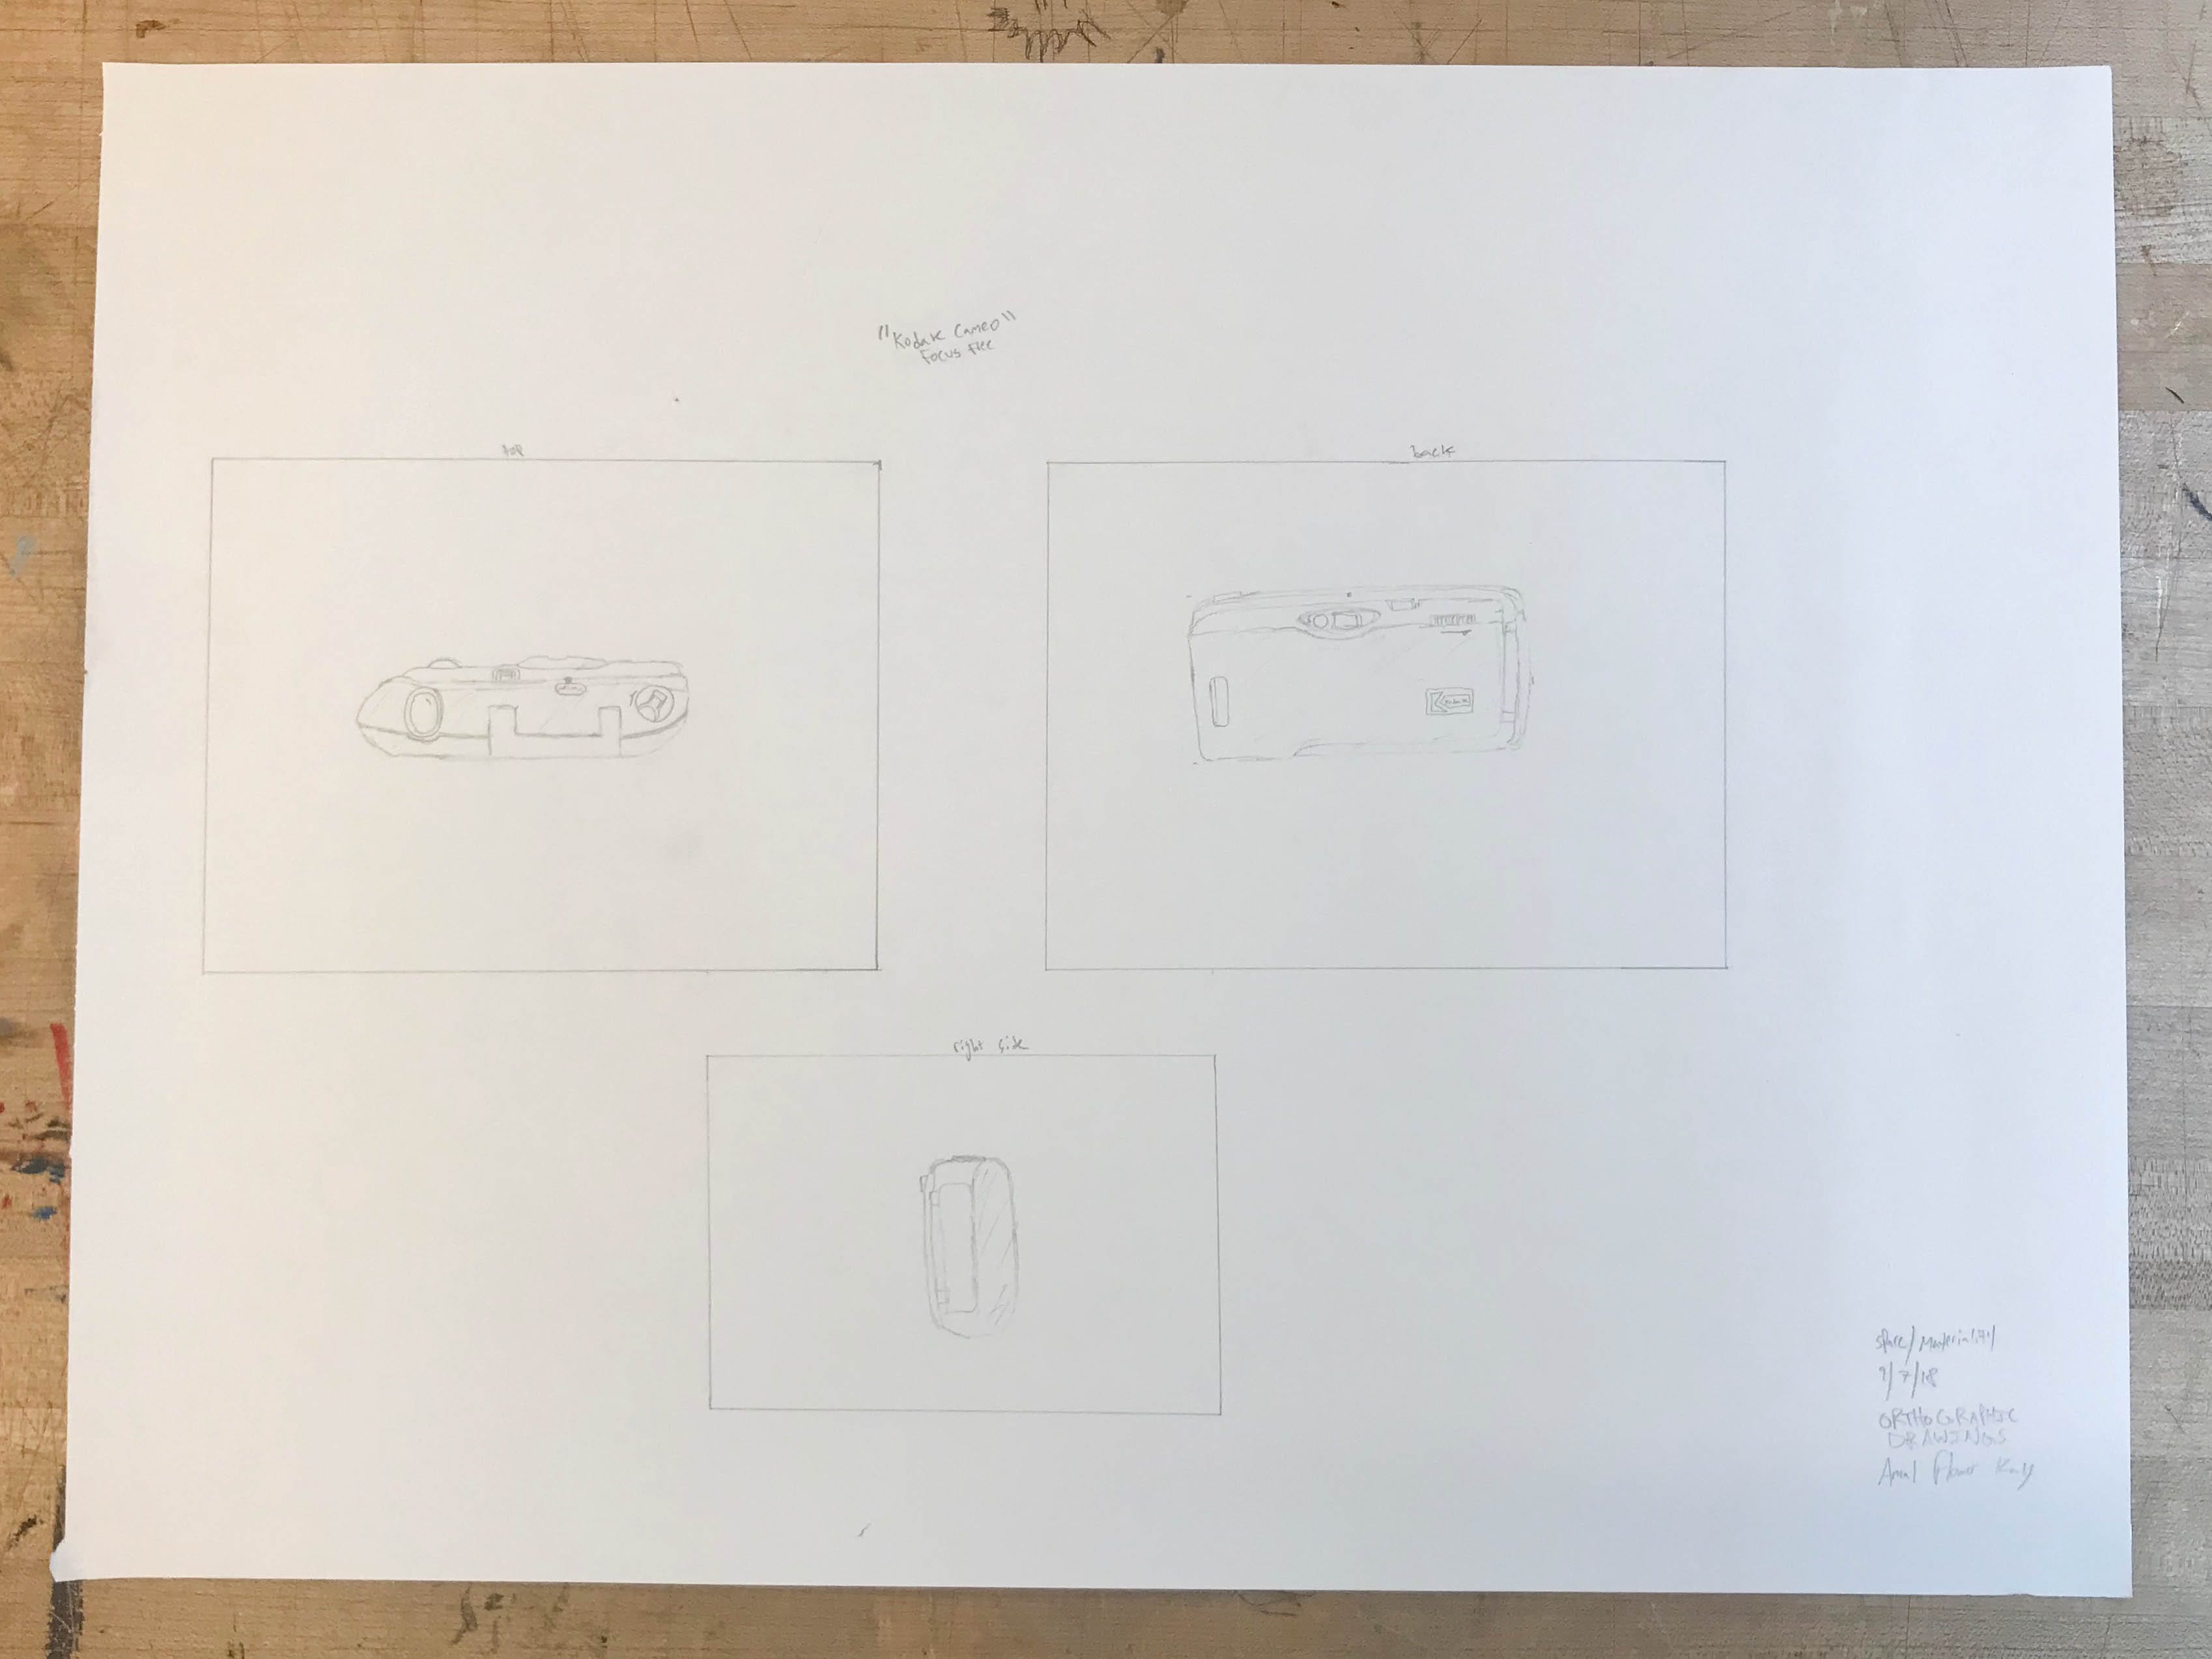 Orthographic Drawings: Reflection